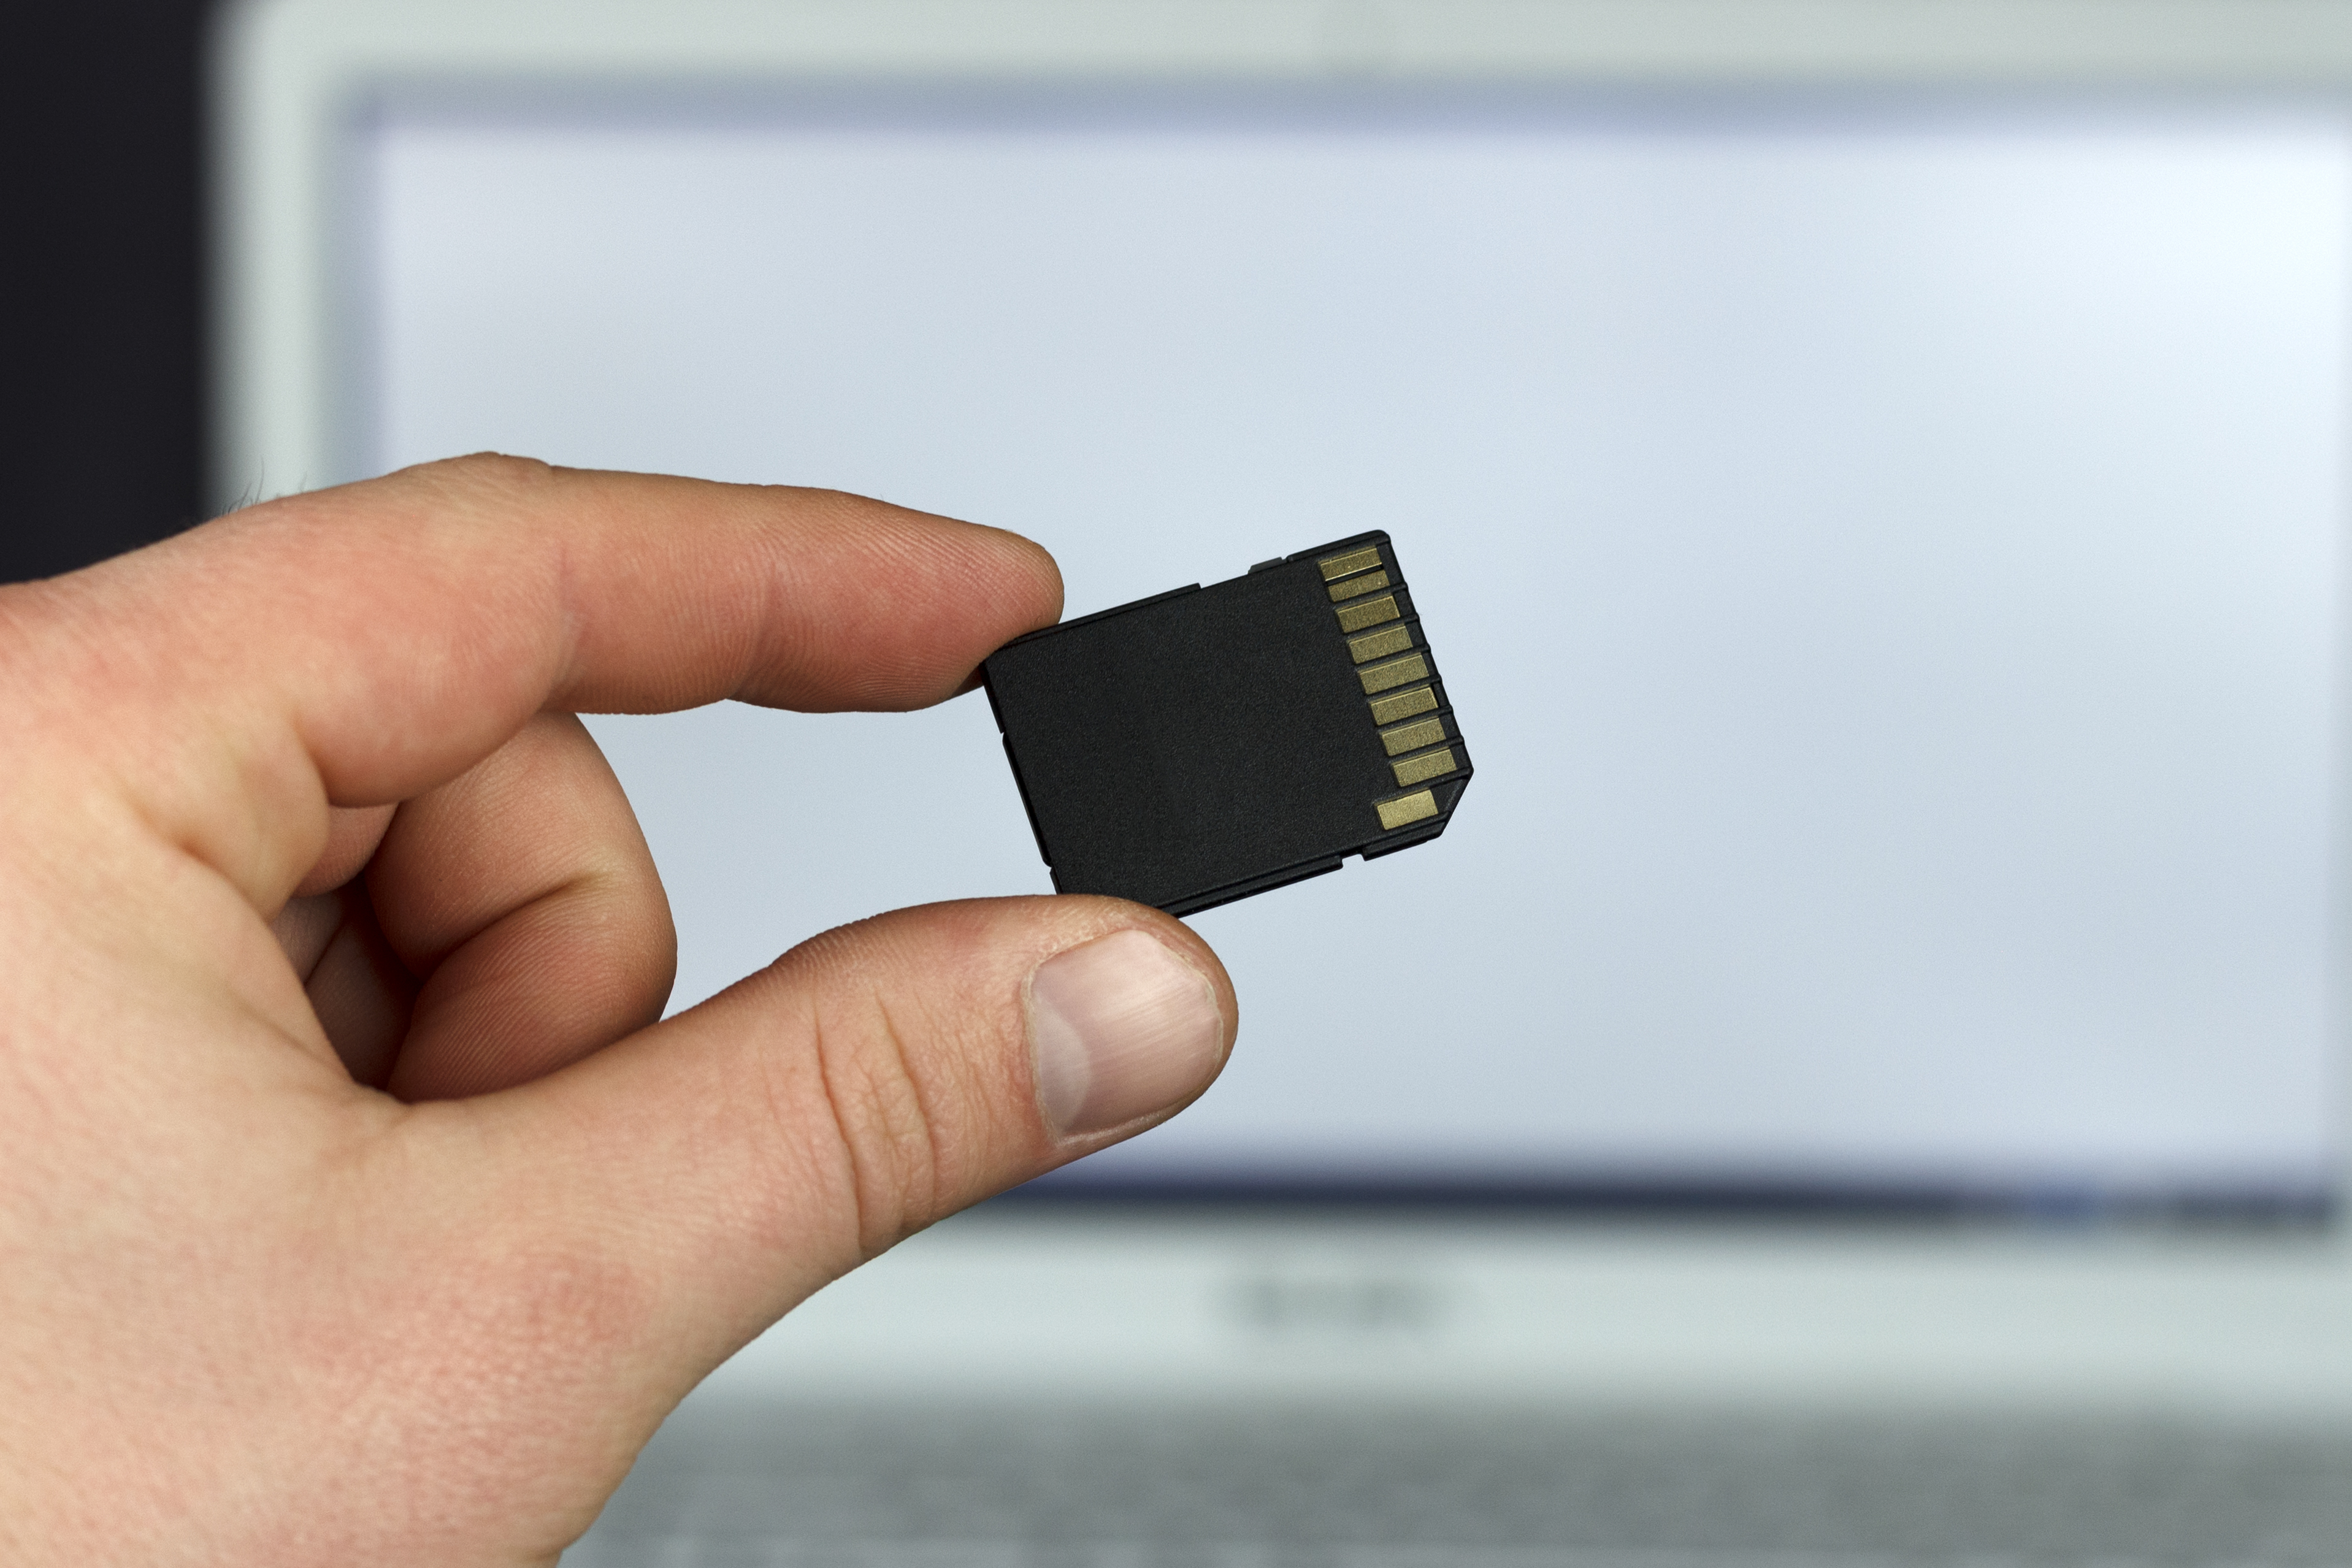 Insert the SD card into another compatible device or computer.
Access the SD card's storage and attempt to delete the photos.